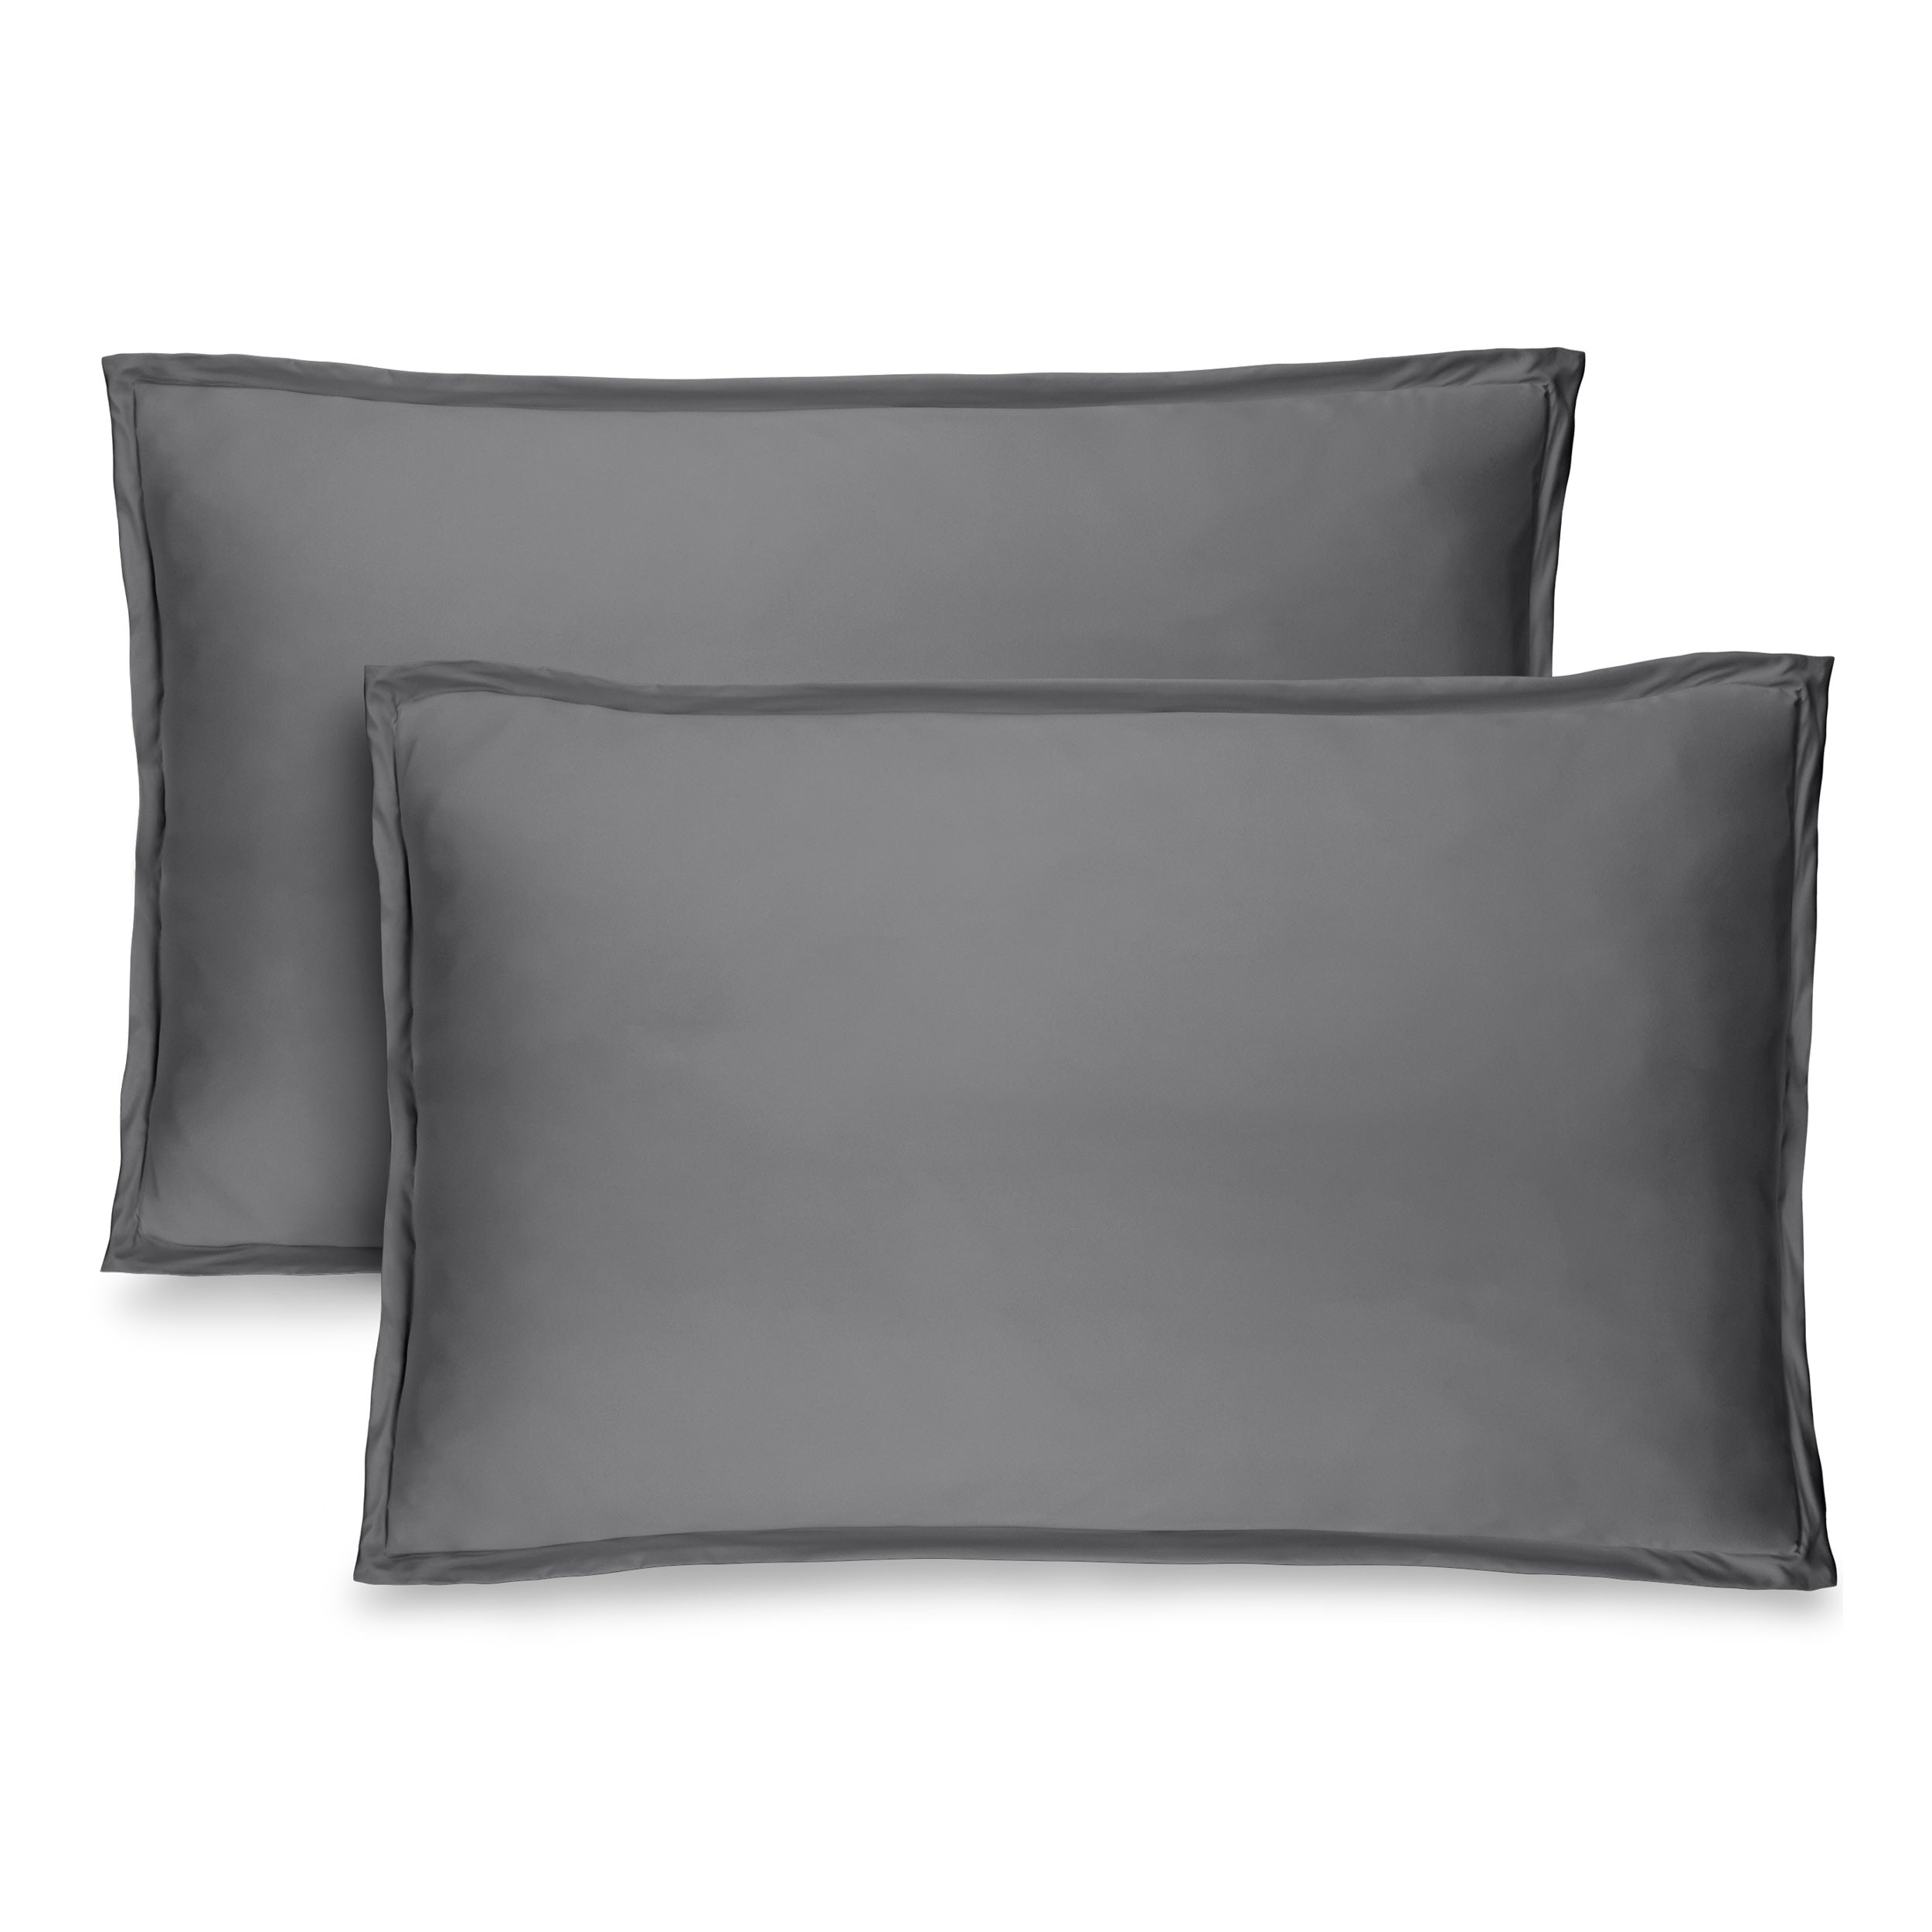 Two grey pillow shams on pillows standing up with one behind the other